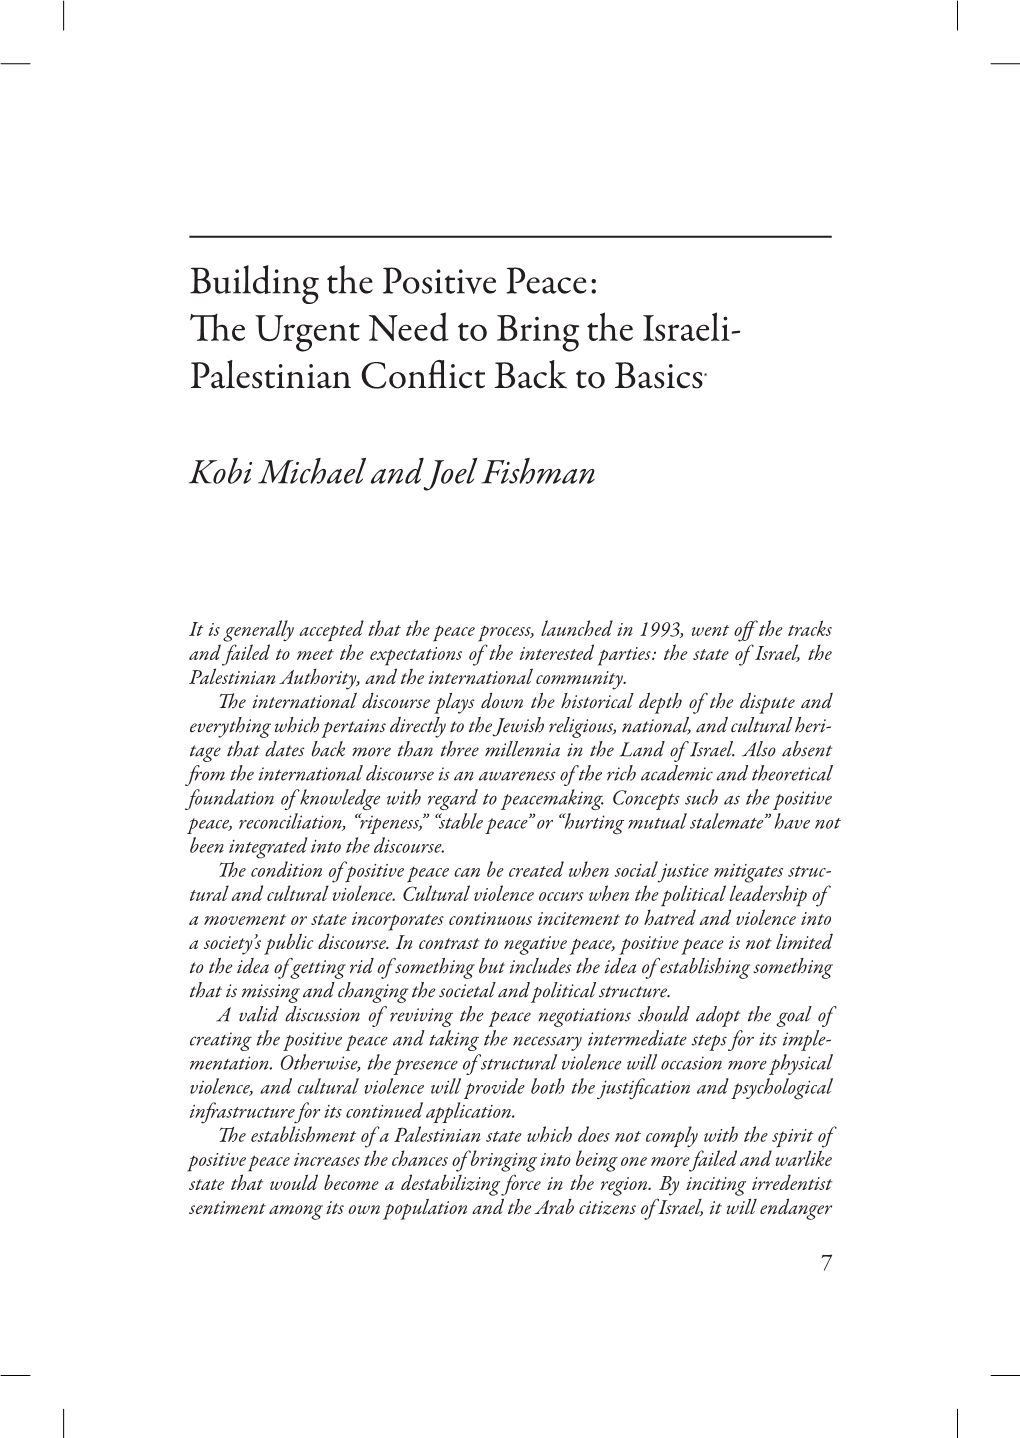 Palestinian Conflict Back to Basics*